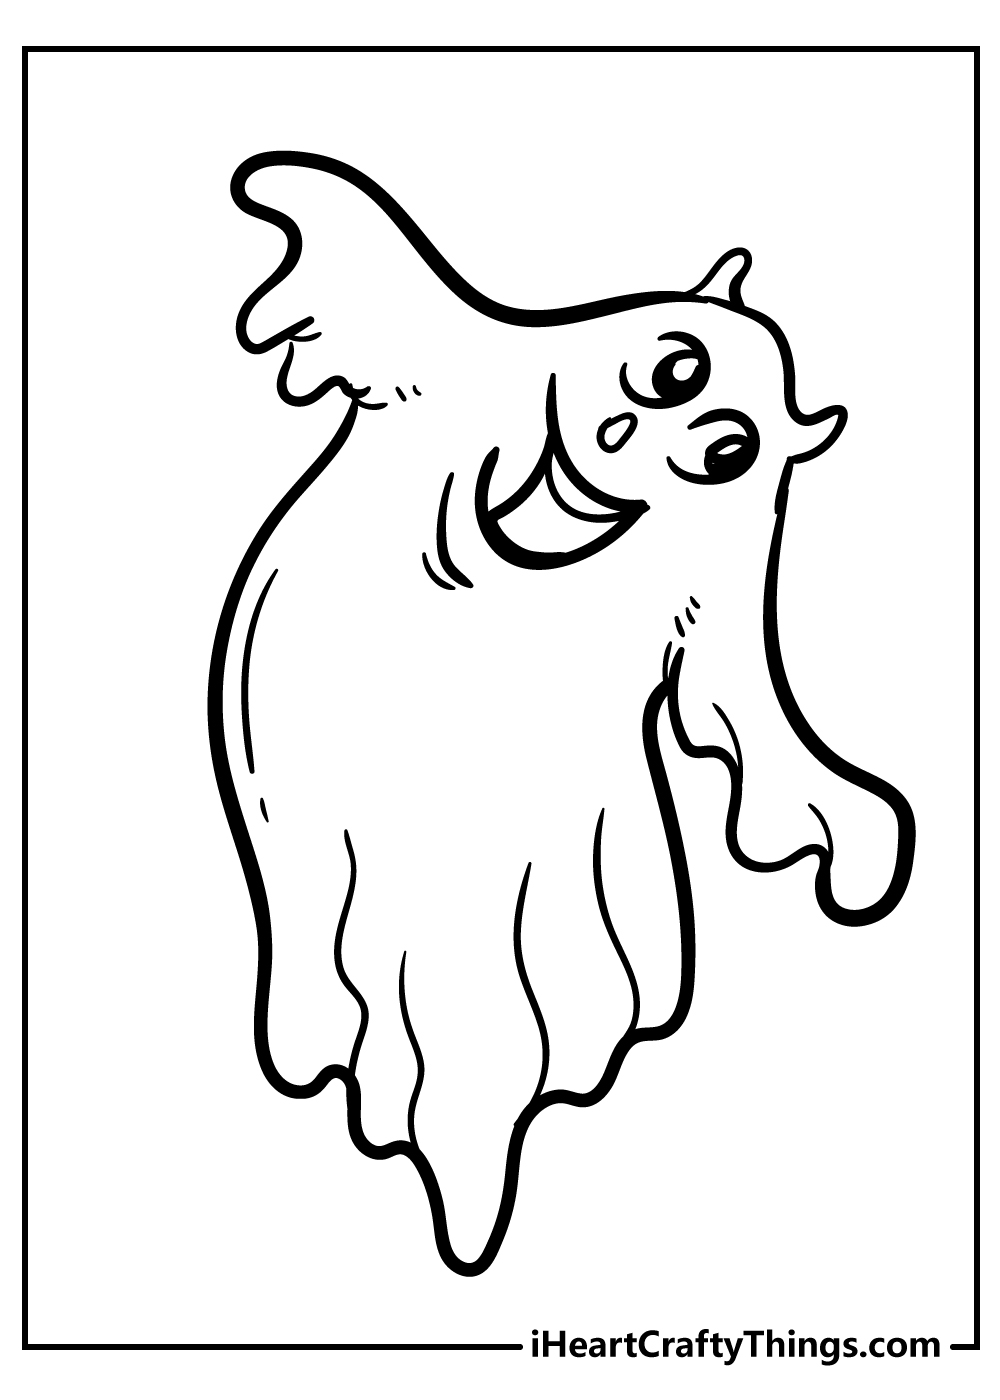 Ghost Coloring Pages free pdf download